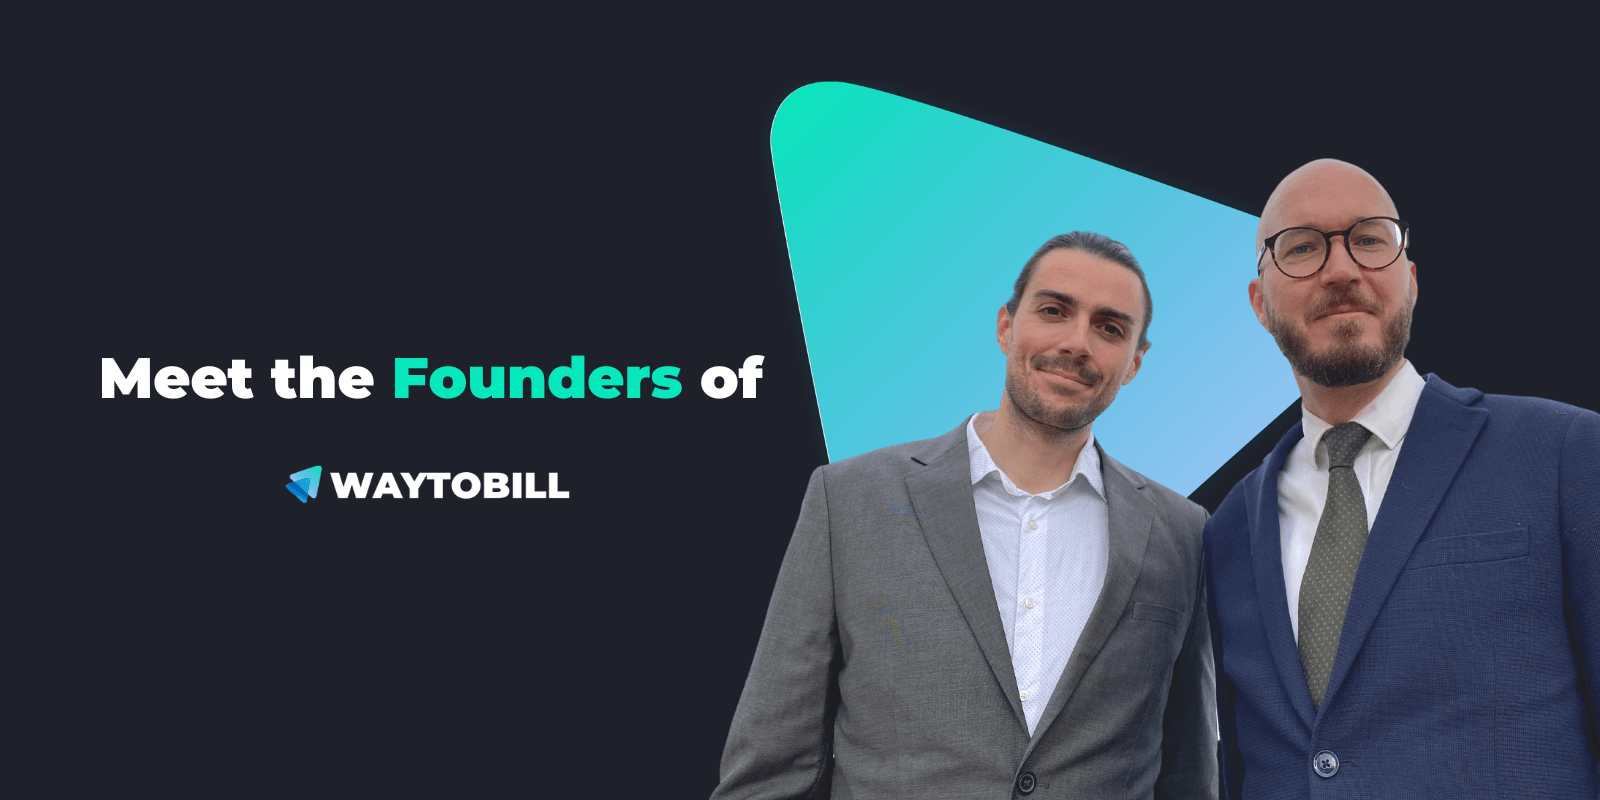 Waytobill Founders: Get to Know the Guys Behind the Project